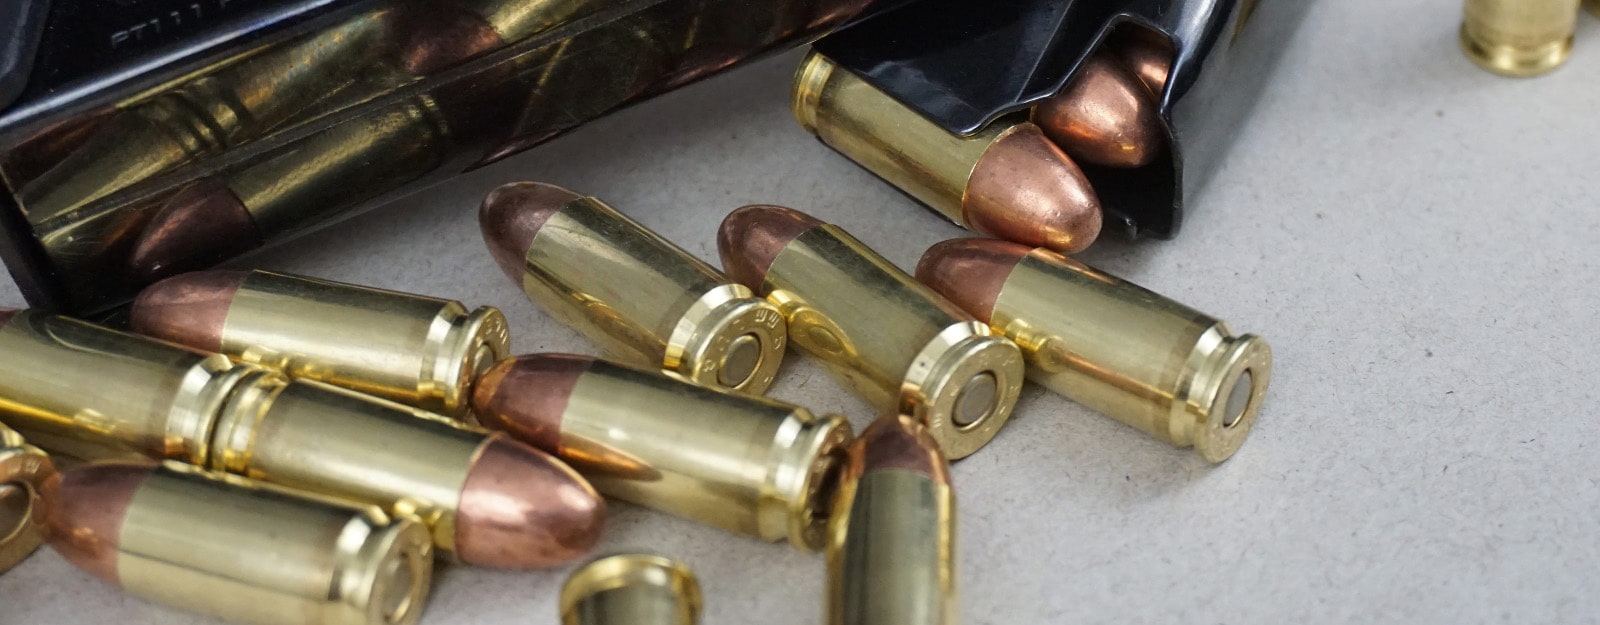 9mm pistol ammo, with some loaded into magazines